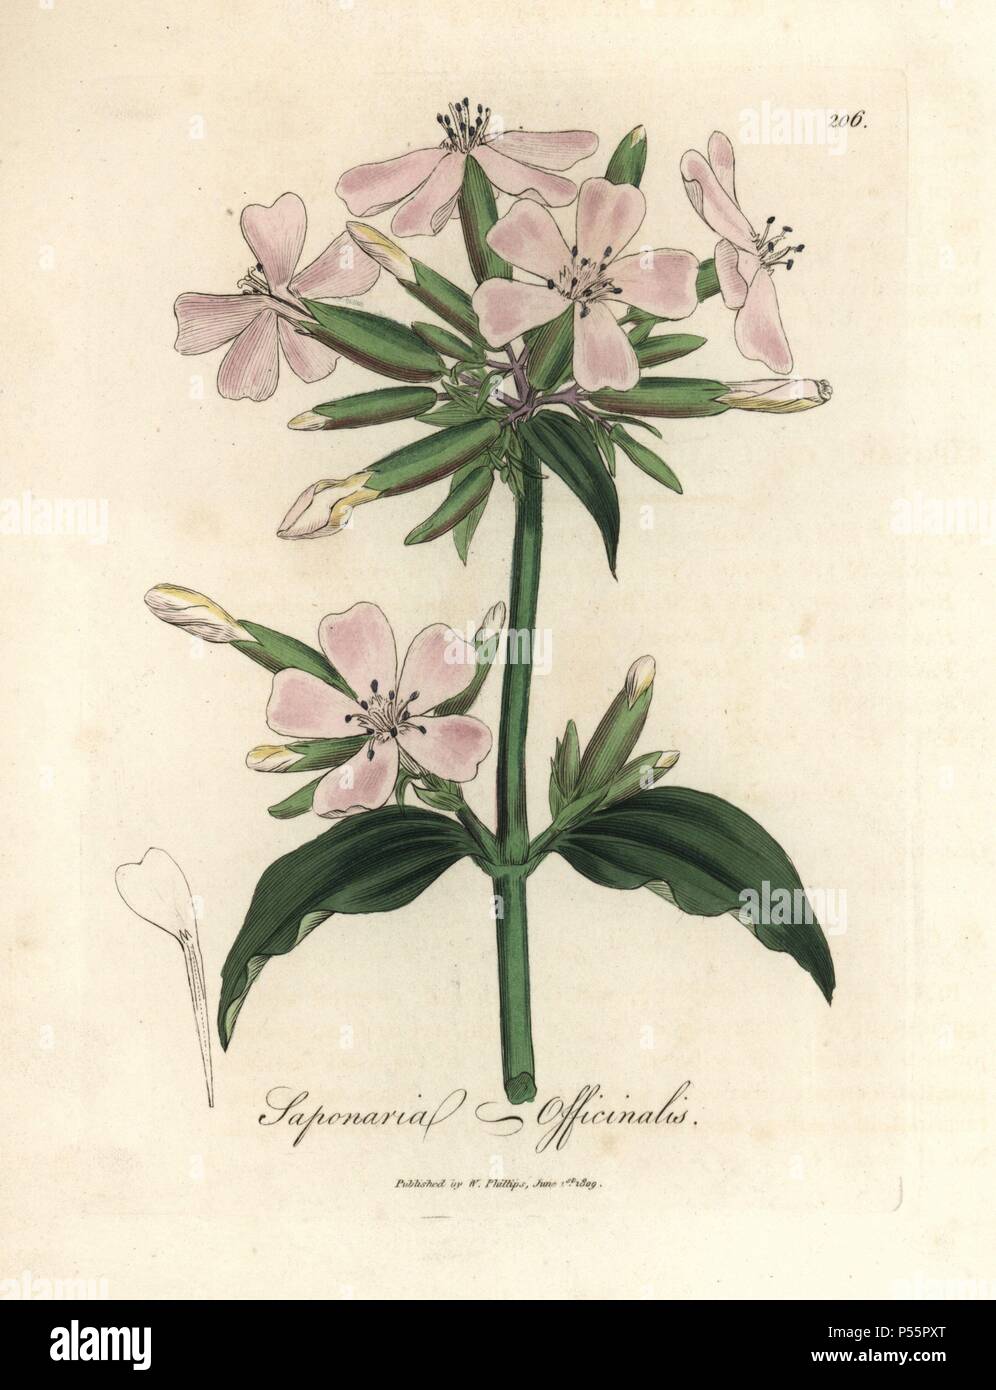 Soapwort, Saponaria officinalis. Handcoloured copperplate engraving from a botanical illustration by James Sowerby from William Woodville and Sir William Jackson Hooker's 'Medical Botany,' John Bohn, London, 1832. The tireless Sowerby (1757-1822) drew over 2, 500 plants for Smith's mammoth 'English Botany' (1790-1814) and 440 mushrooms for 'Coloured Figures of English Fungi ' (1797) among many other works. Stock Photo